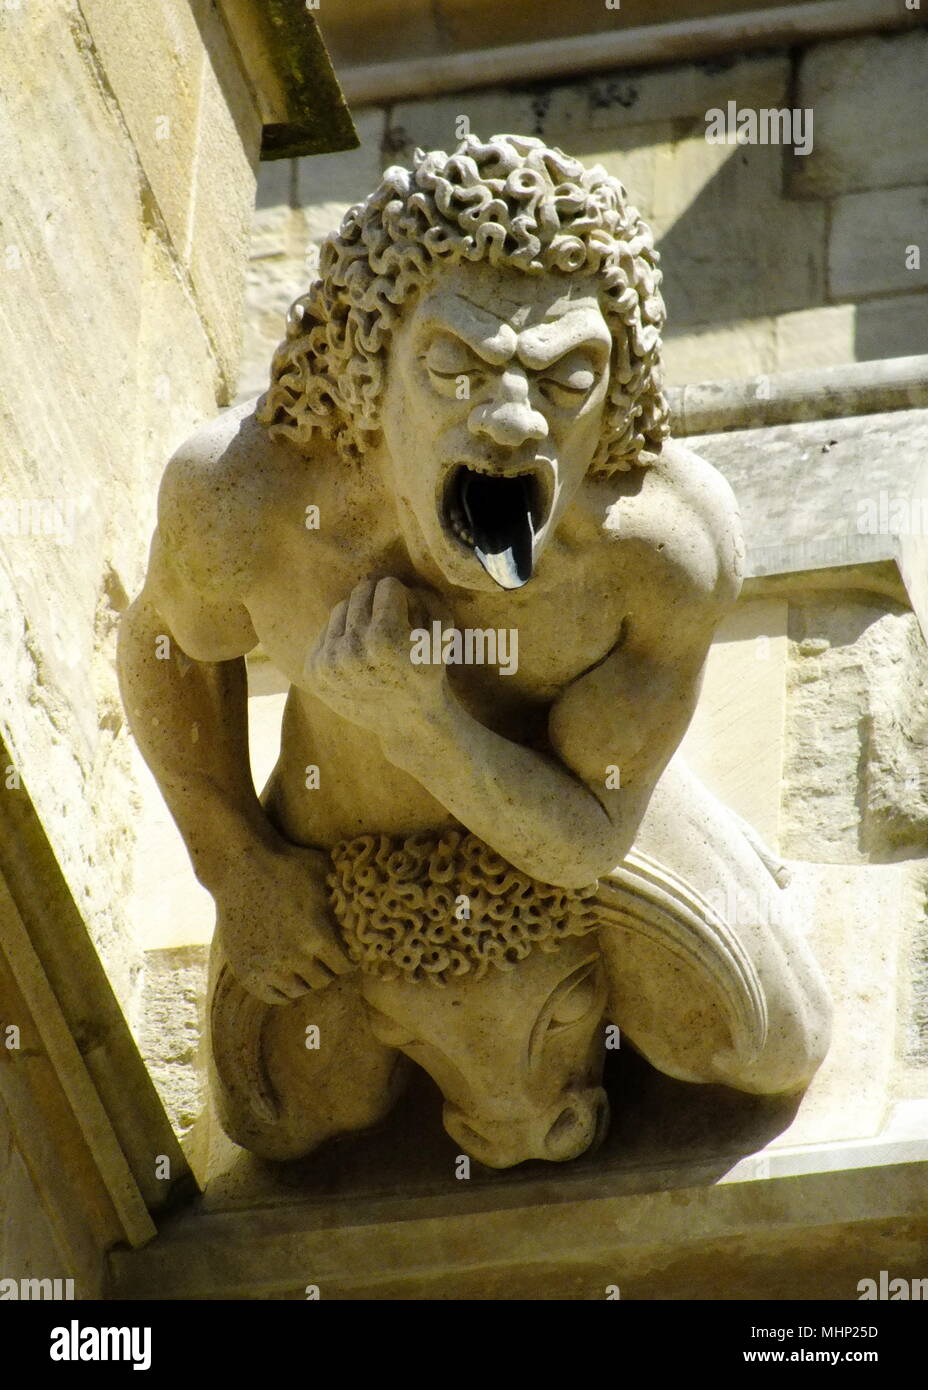 Gargoyle of an ugly man riding on a bull, with a water spout in his mouth, at Gloucester Cathedral, Gloucestershire. Stock Photo